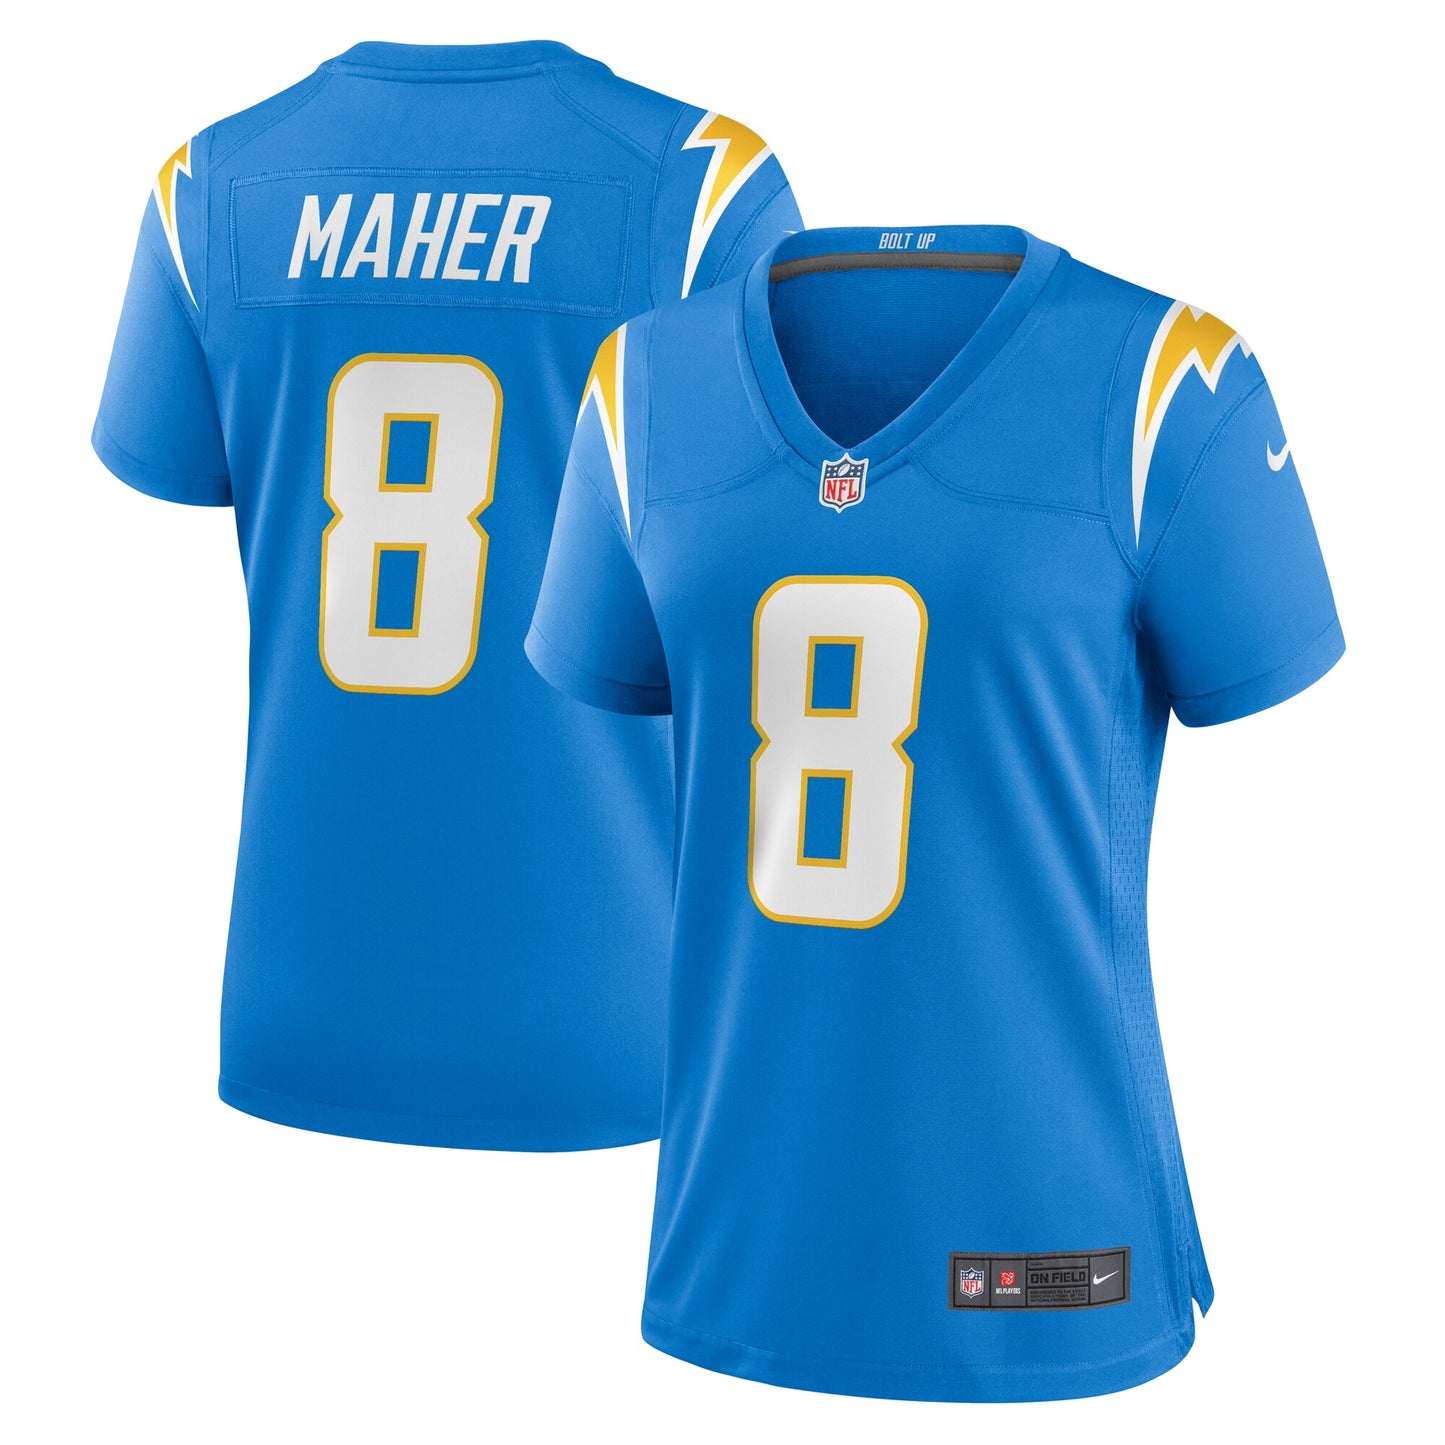 Brett Maher Los Angeles Chargers Nike Women's Team Game Jersey -  Powder Blue